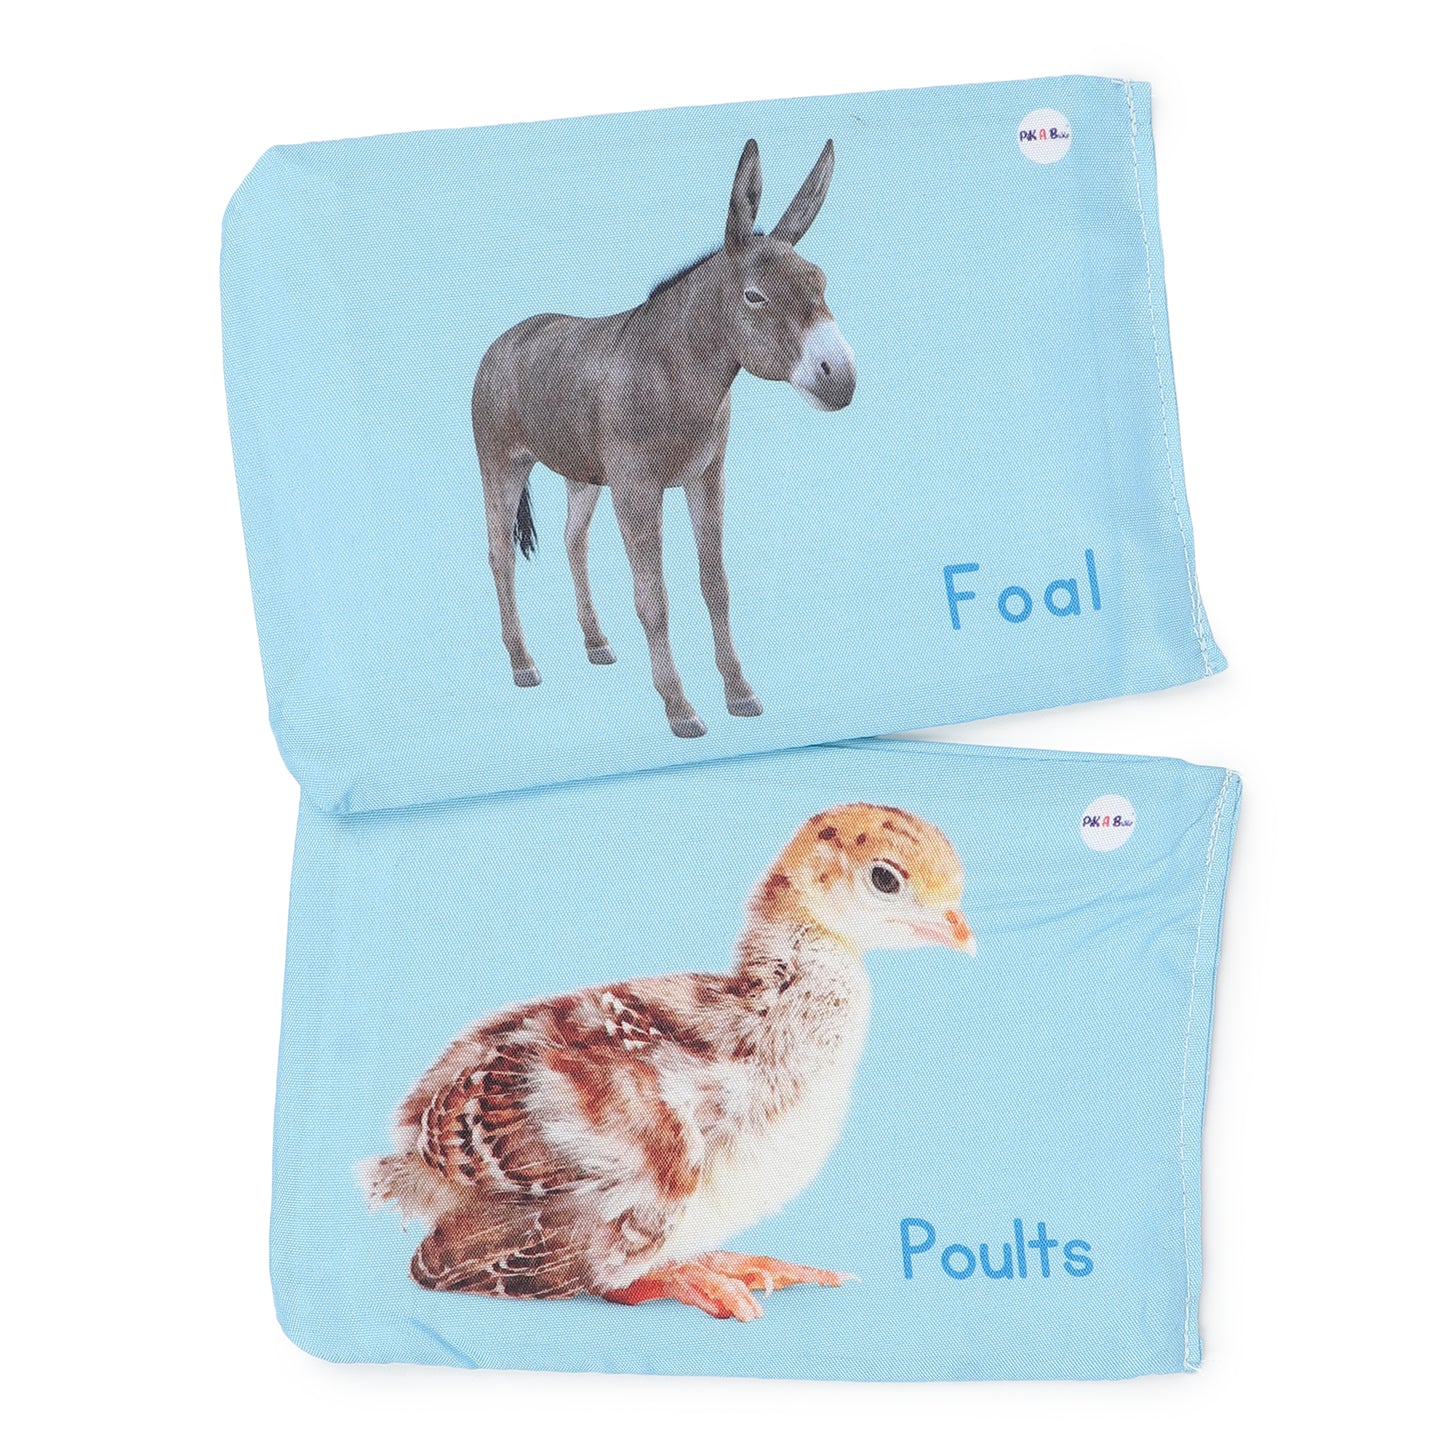 PiK A BOO Cloth Farm Animals Flash Cards l Kids Early Learning l Brain Development Study Material for Preschoolers and Kindergarten